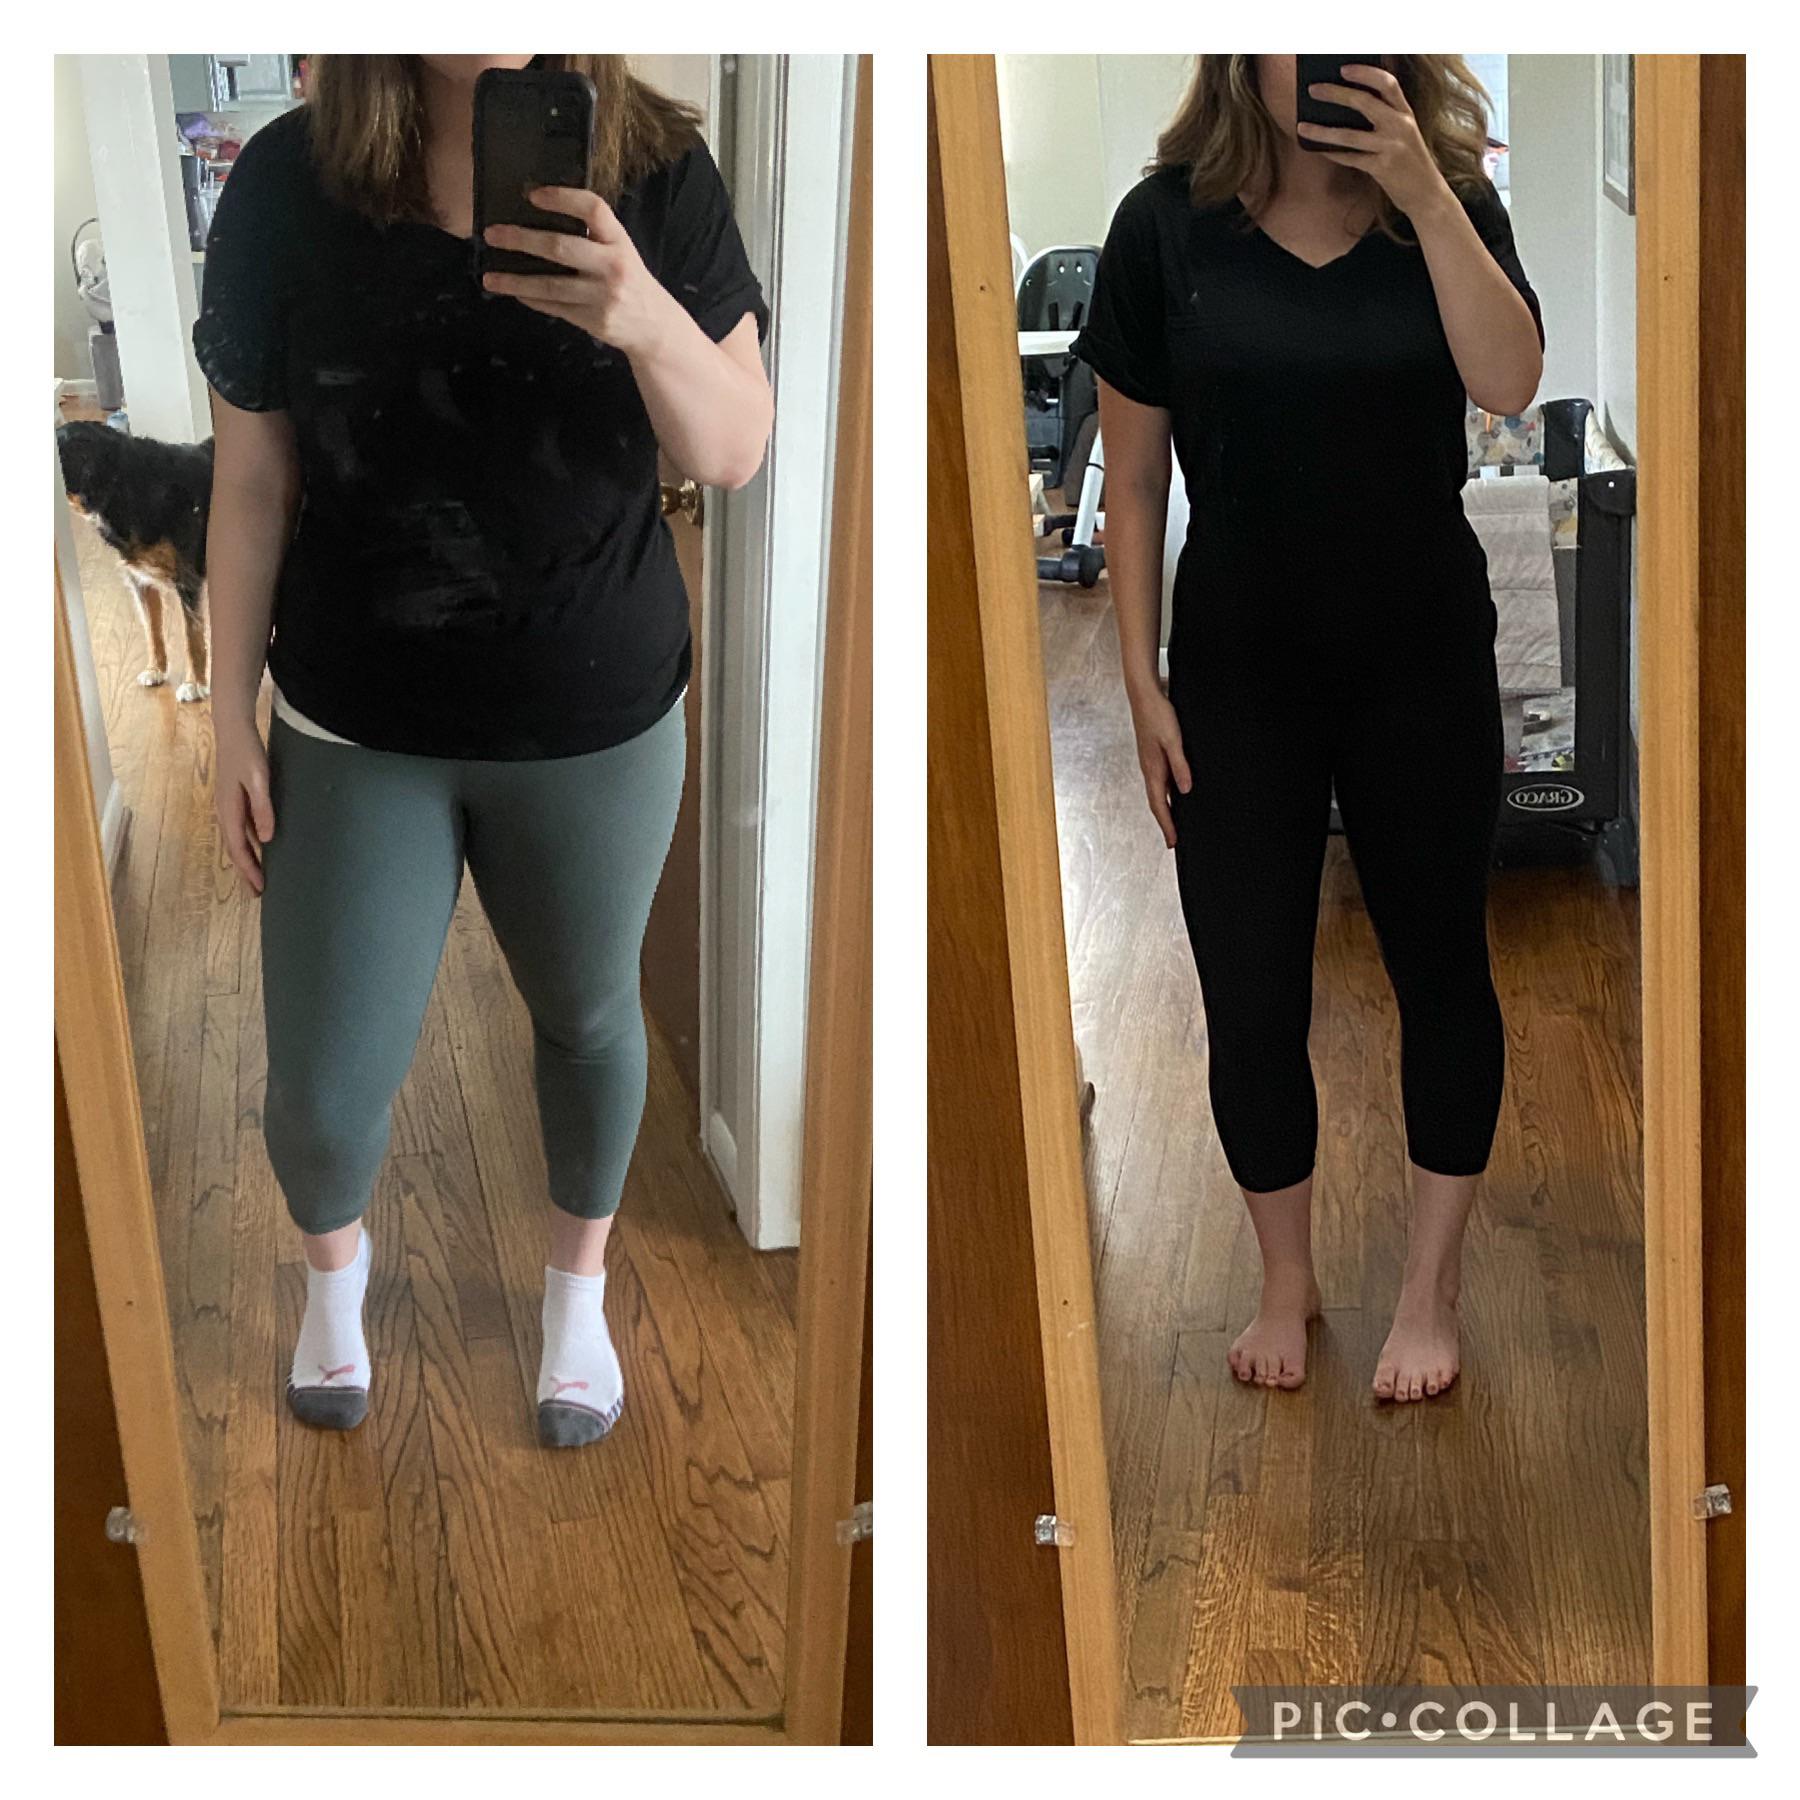 55 lbs Weight Loss 5 foot 4 Female 205 lbs to 150 lbs.